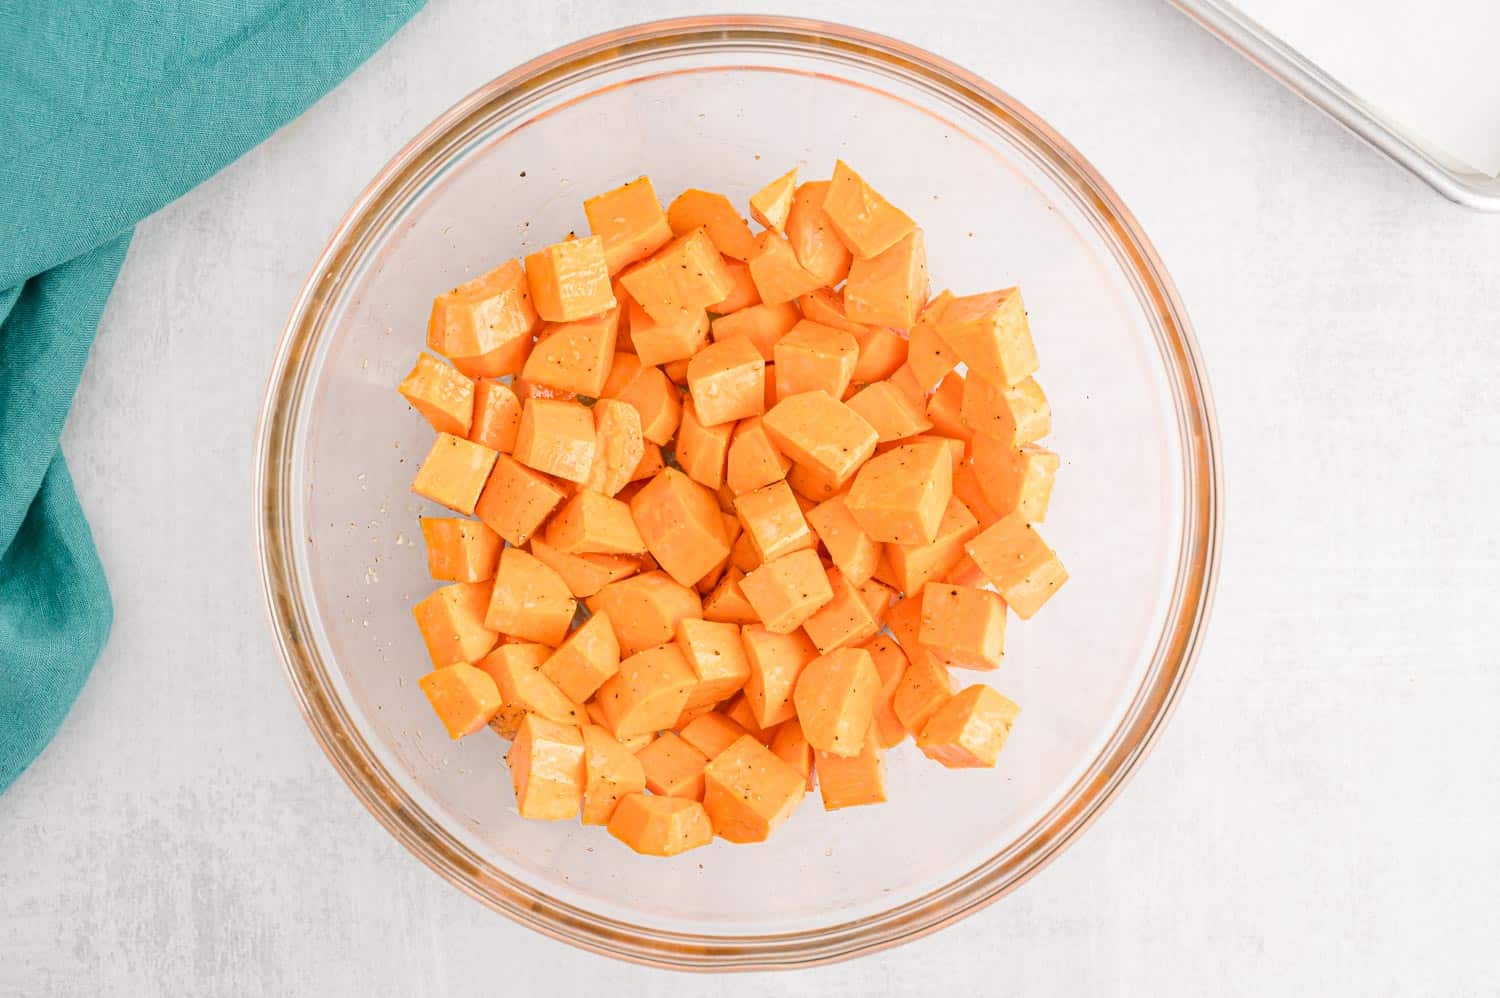 Sweet potatoes in a clear glass bowl.